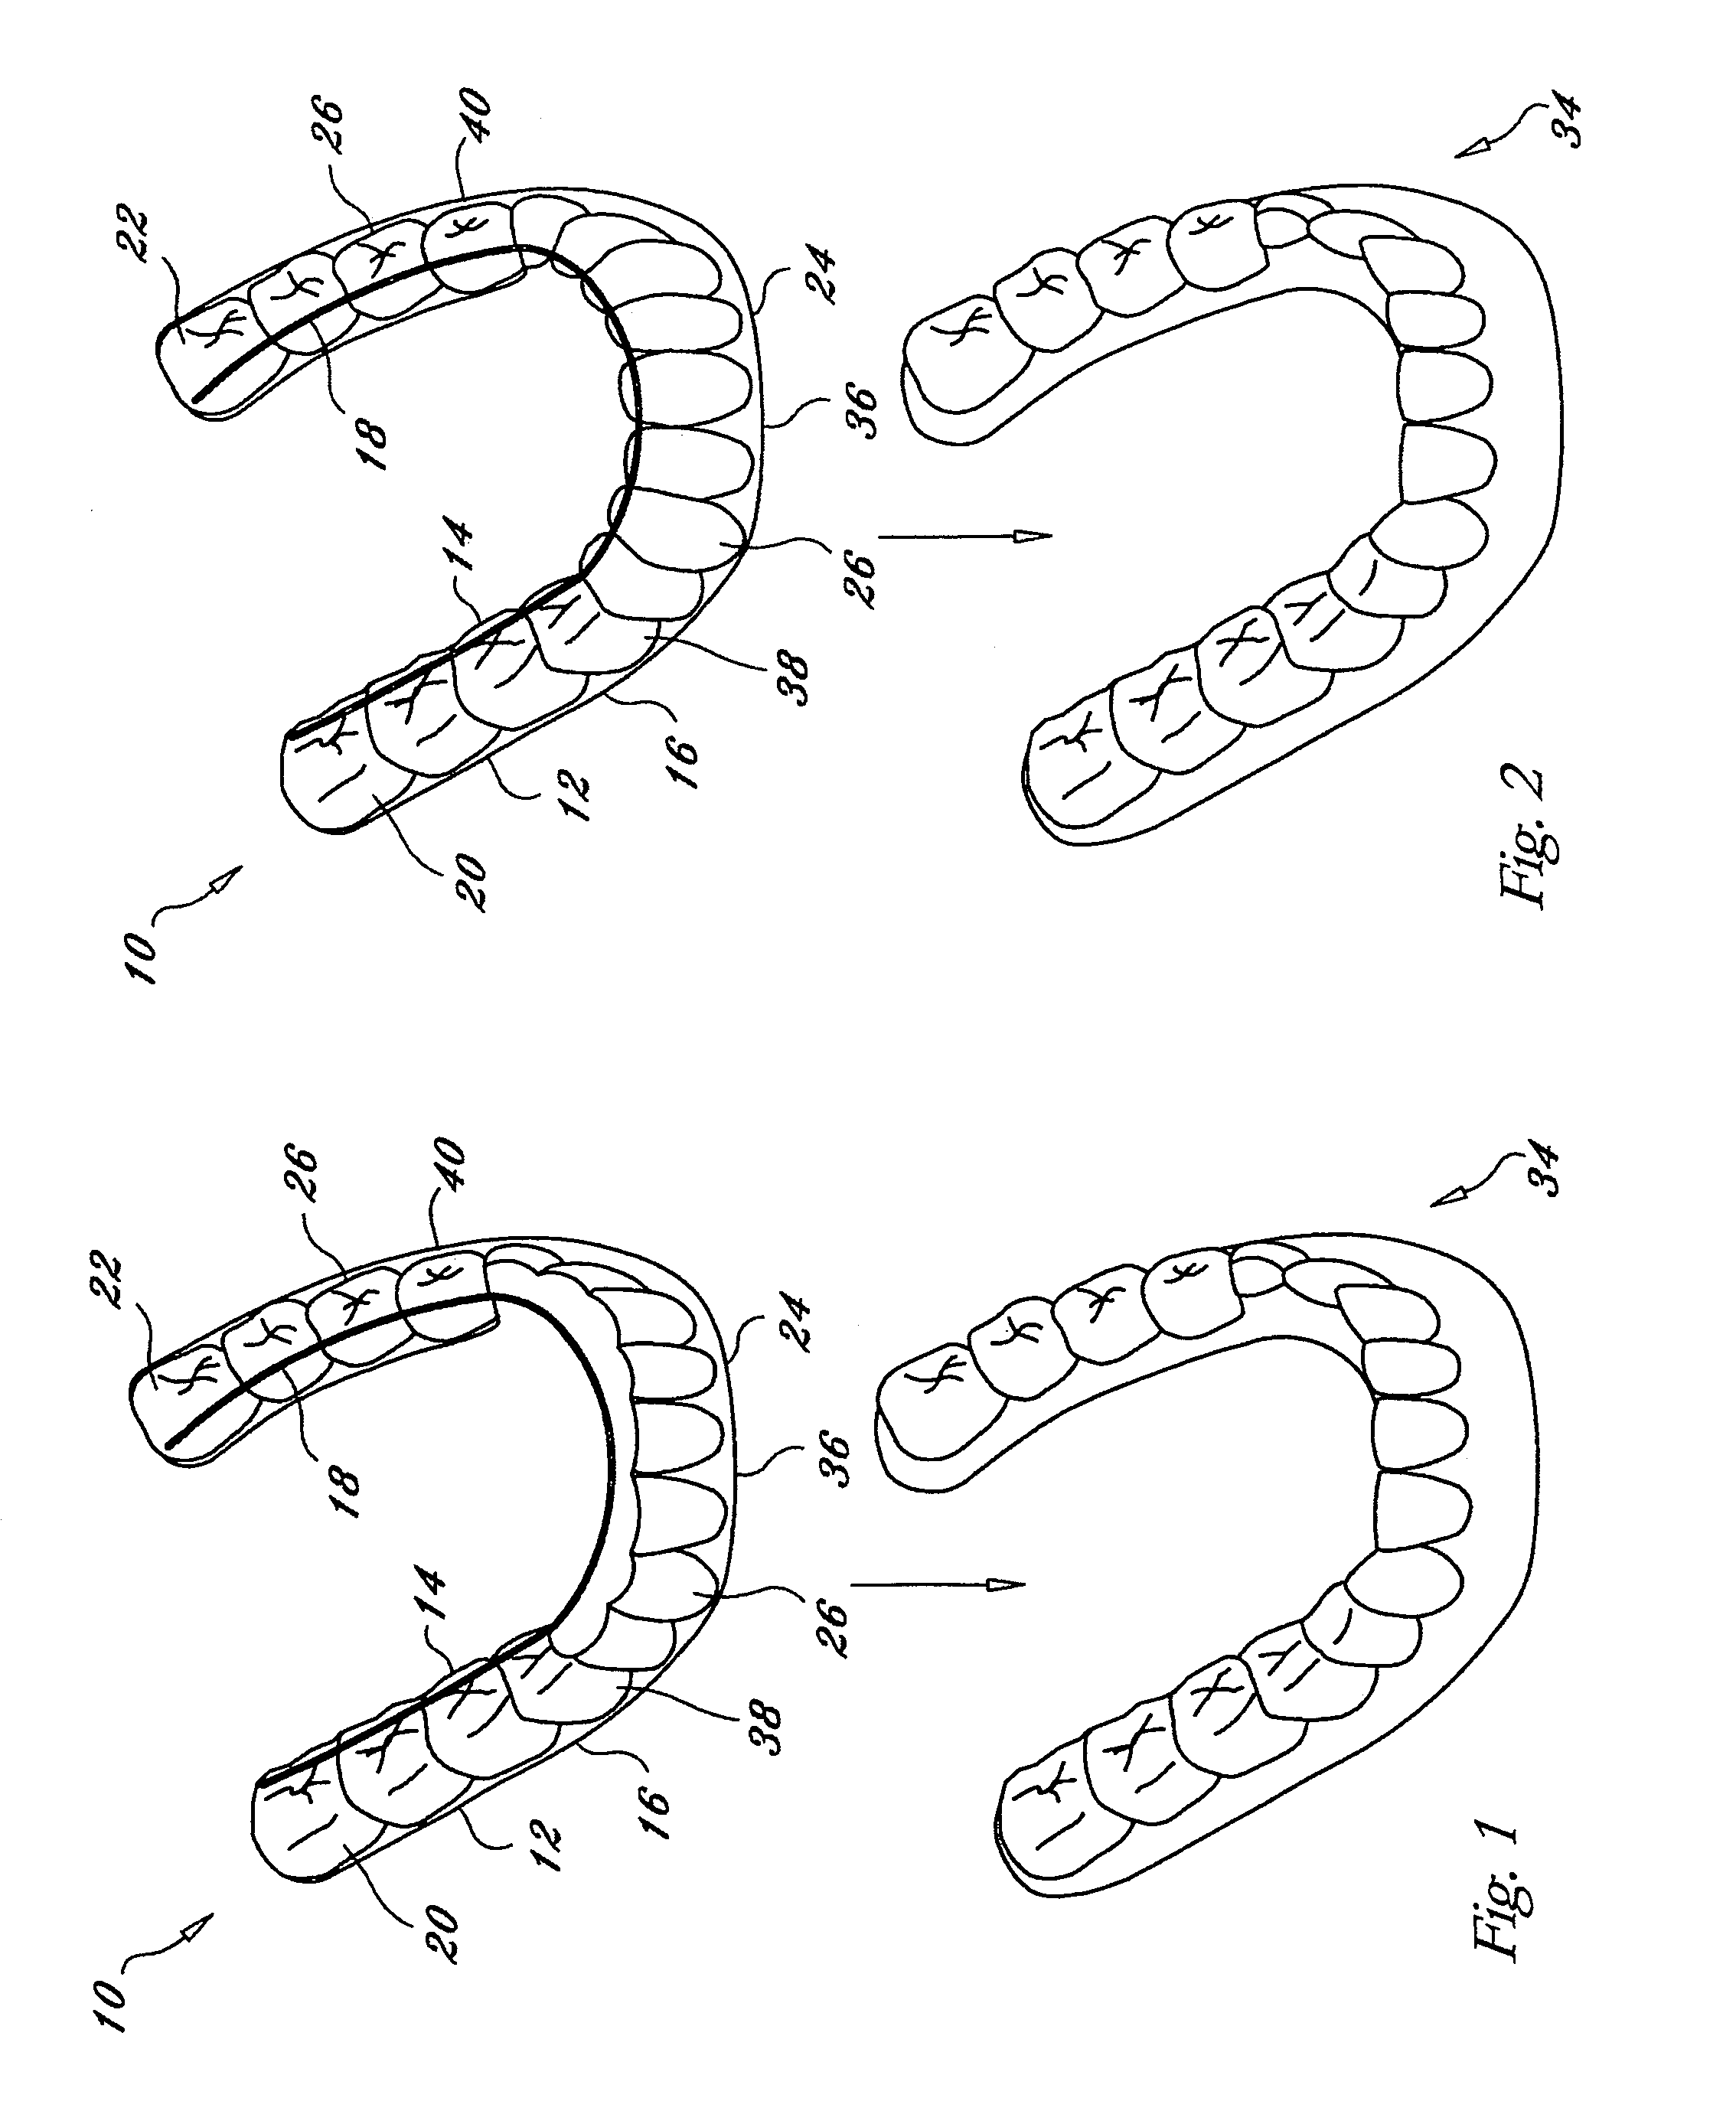 Orthodontic appliance with embedded wire for moving teeth and method